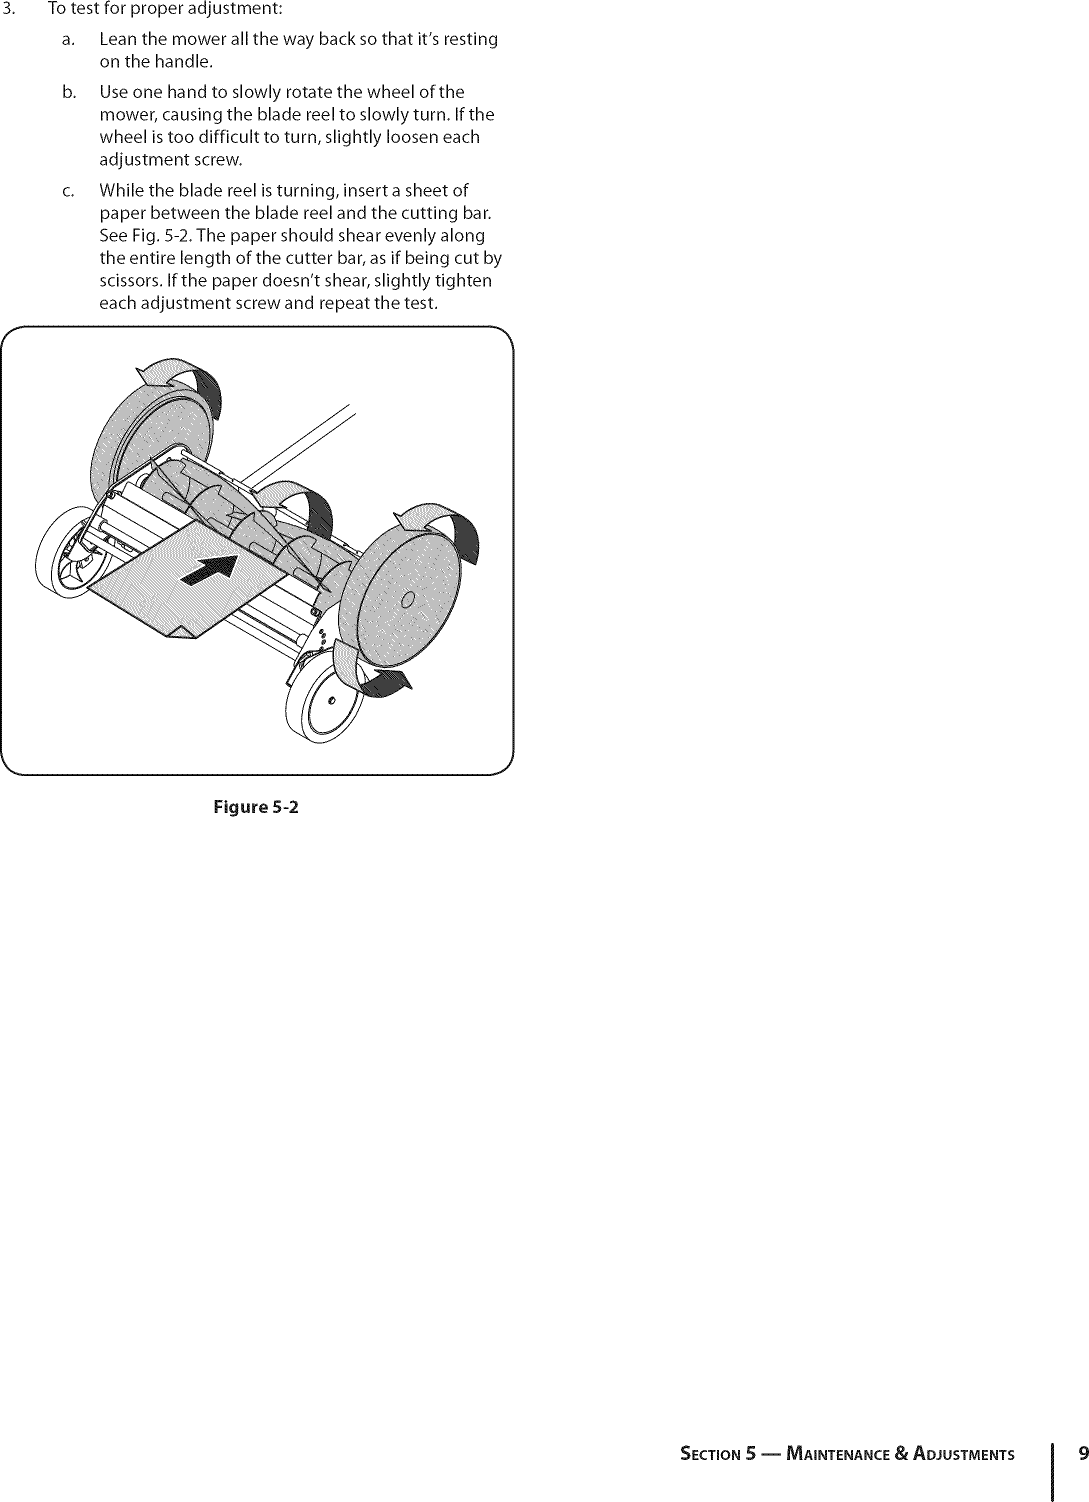 Page 9 of 12 - Kmart 02823117-3 User Manual  REEL MOWER - Manuals And Guides 1012090L